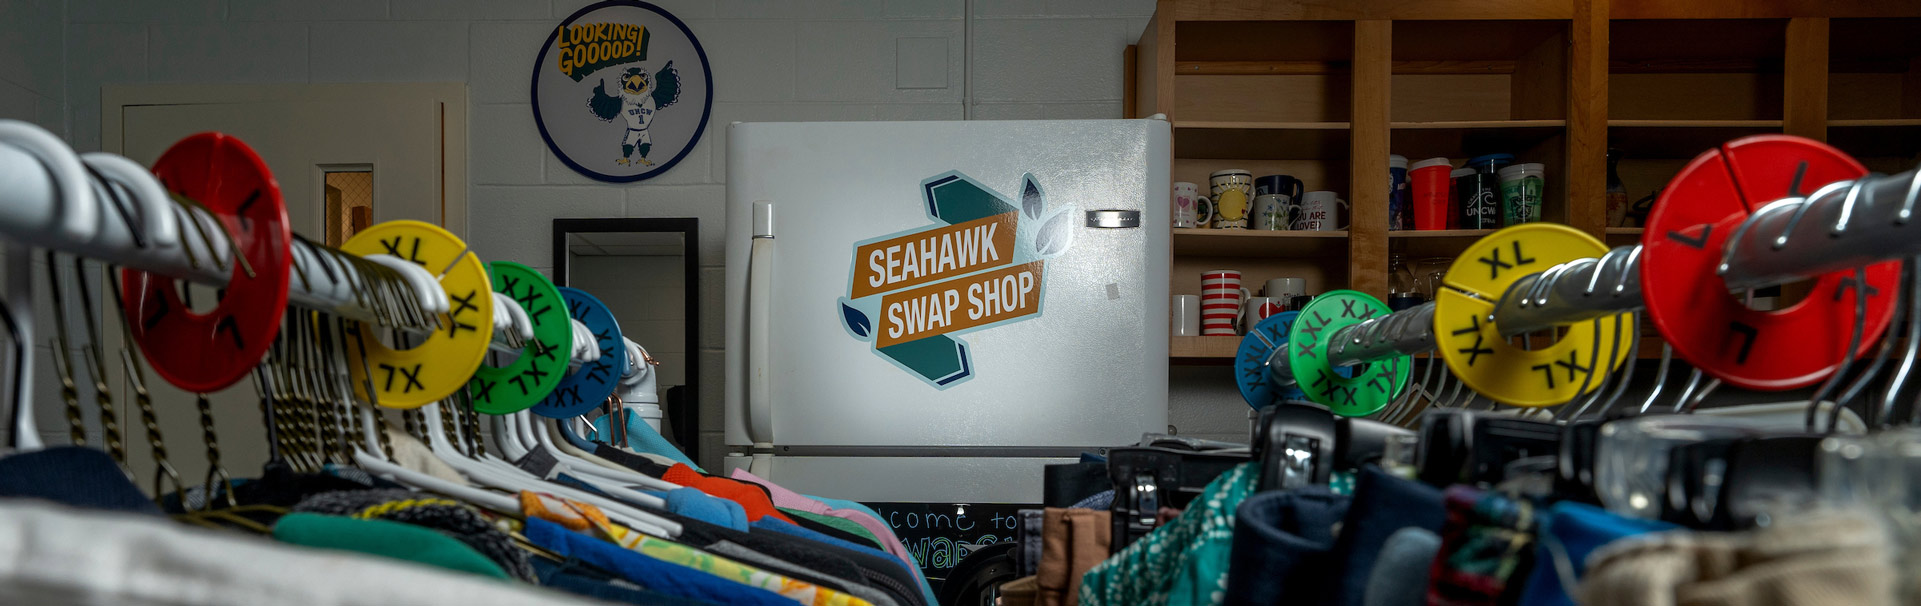 Room with clothes hanging and a sign that says Seahawk swap shop